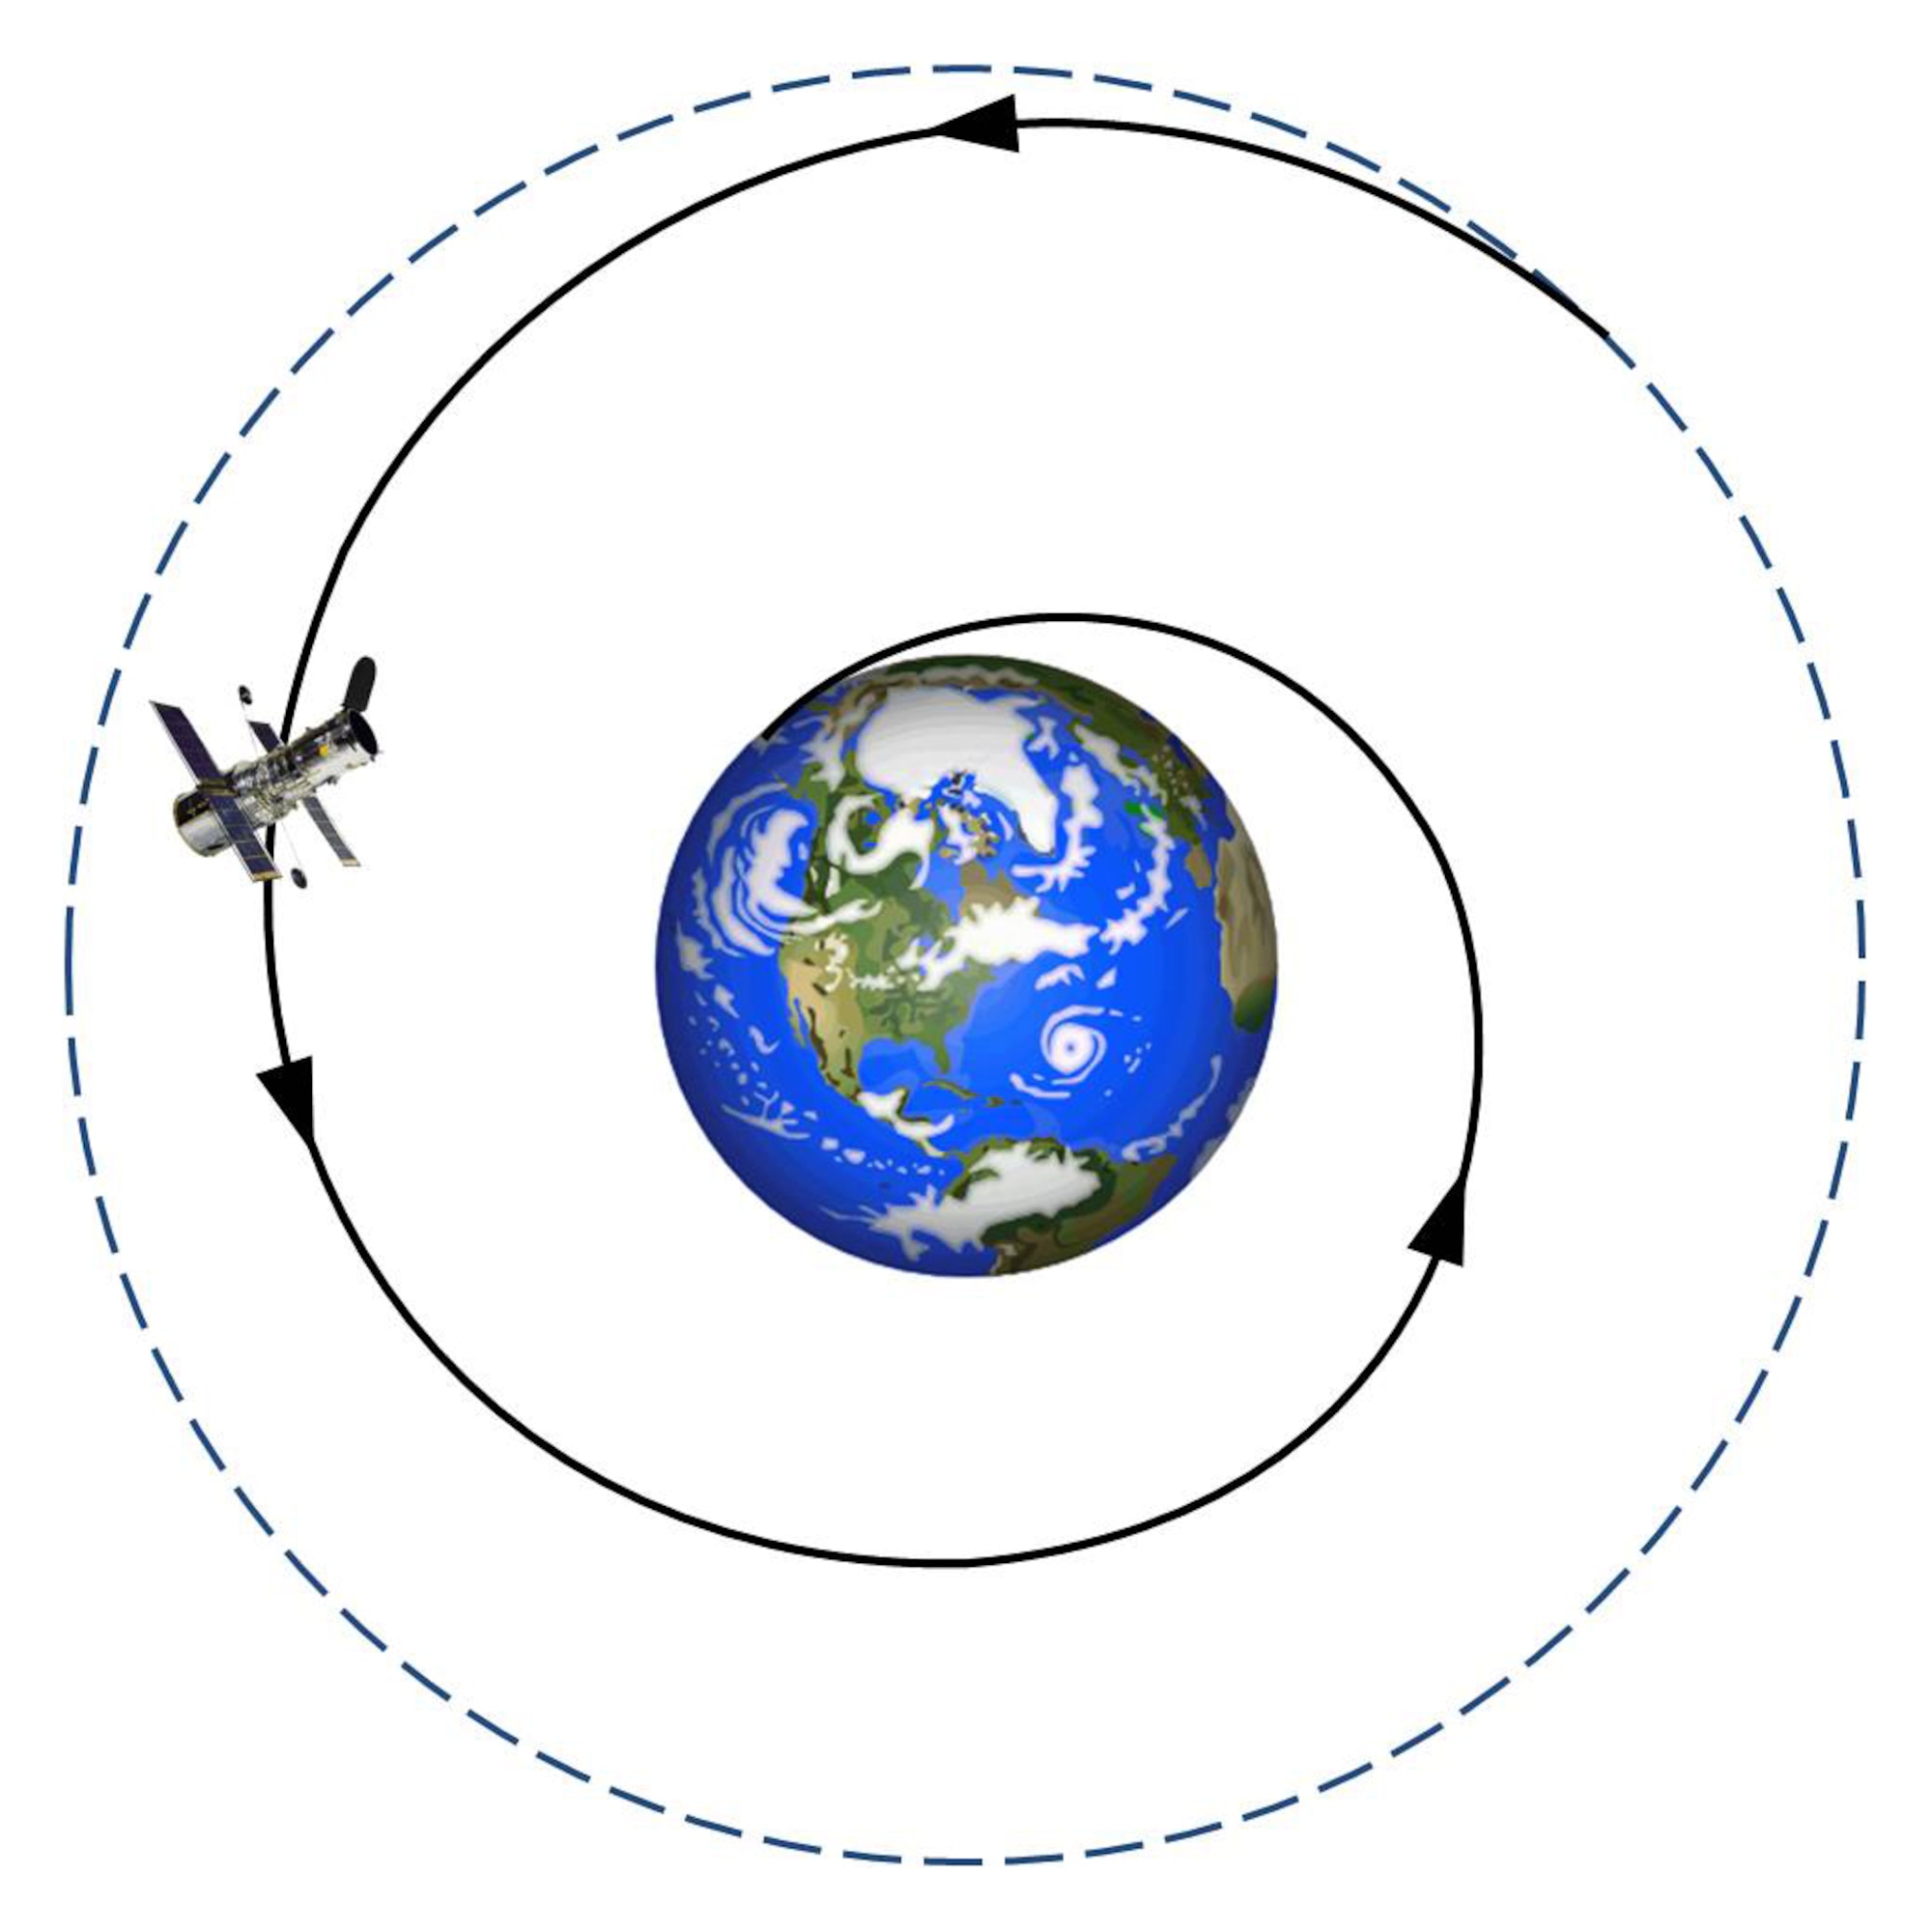 Tactical Satellite-2 re-entered the earth’s atmosphere Feb 5, 2011.  The Air Force Research Laboratory’s Orbital Drag Environment Program predicted the exact re-entry date.  Air Force Illustration.